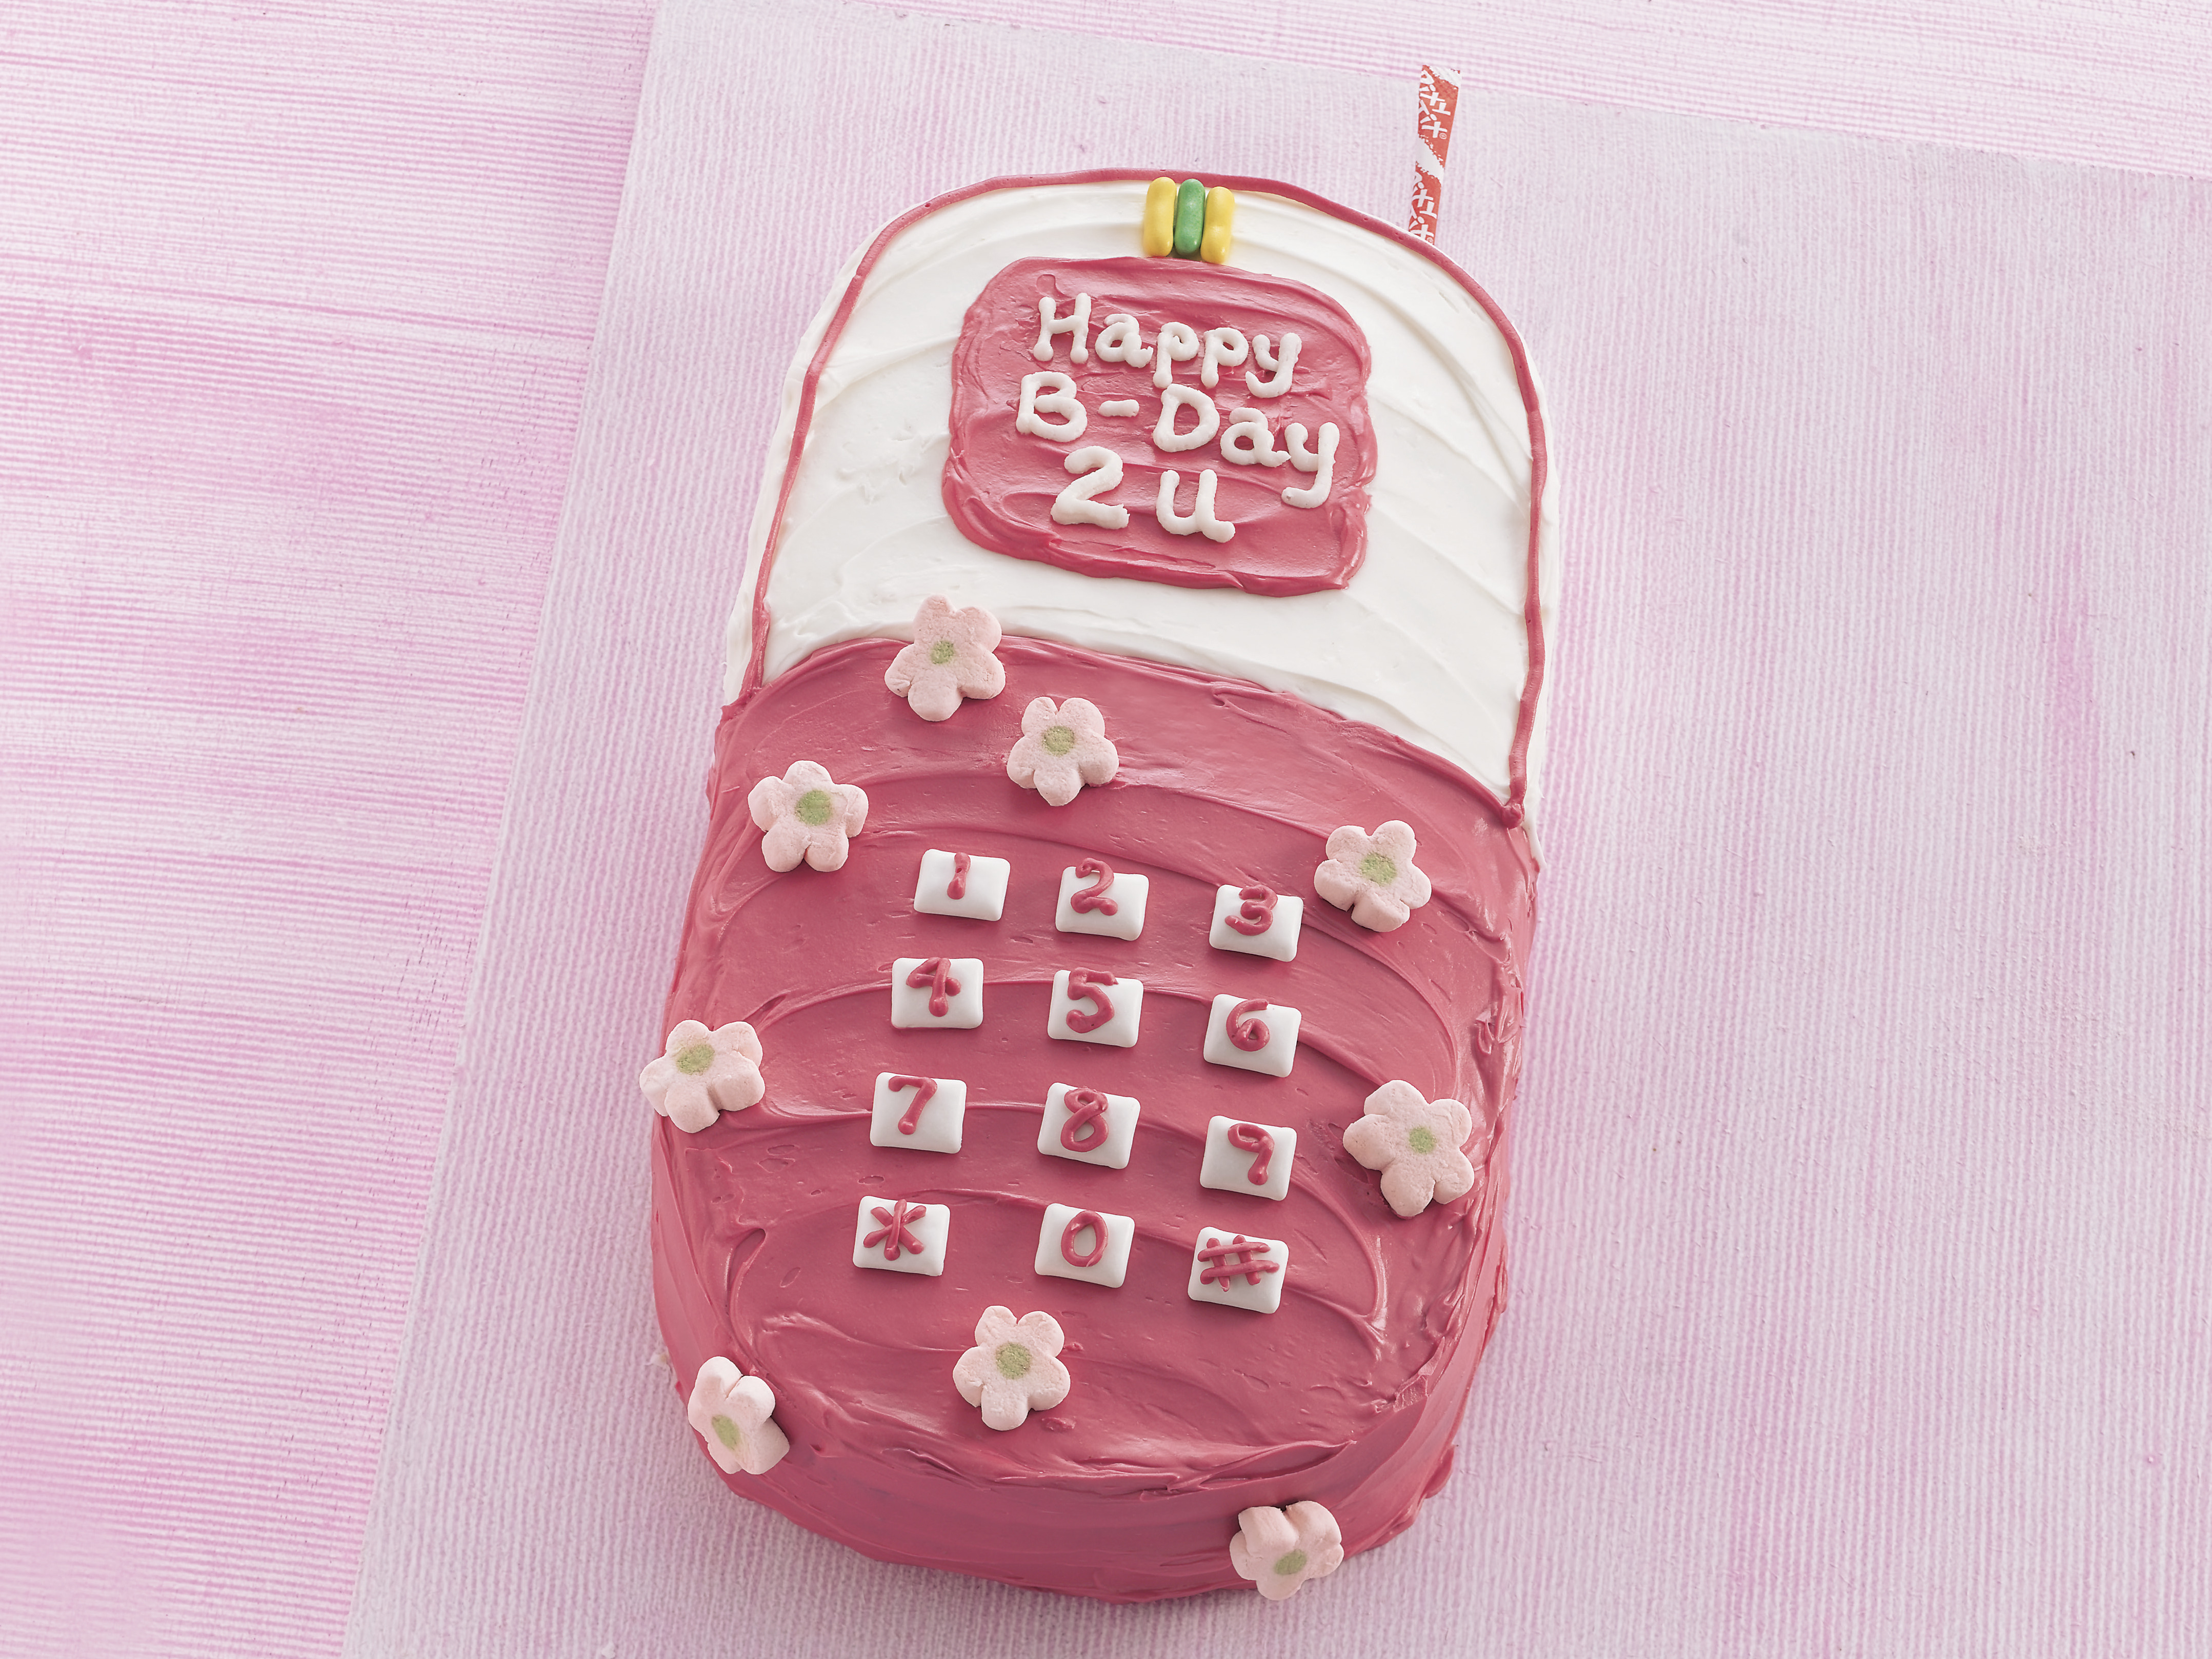 Cake Decorating Supplies - Get Inspired with Our Mobile Phone Topper